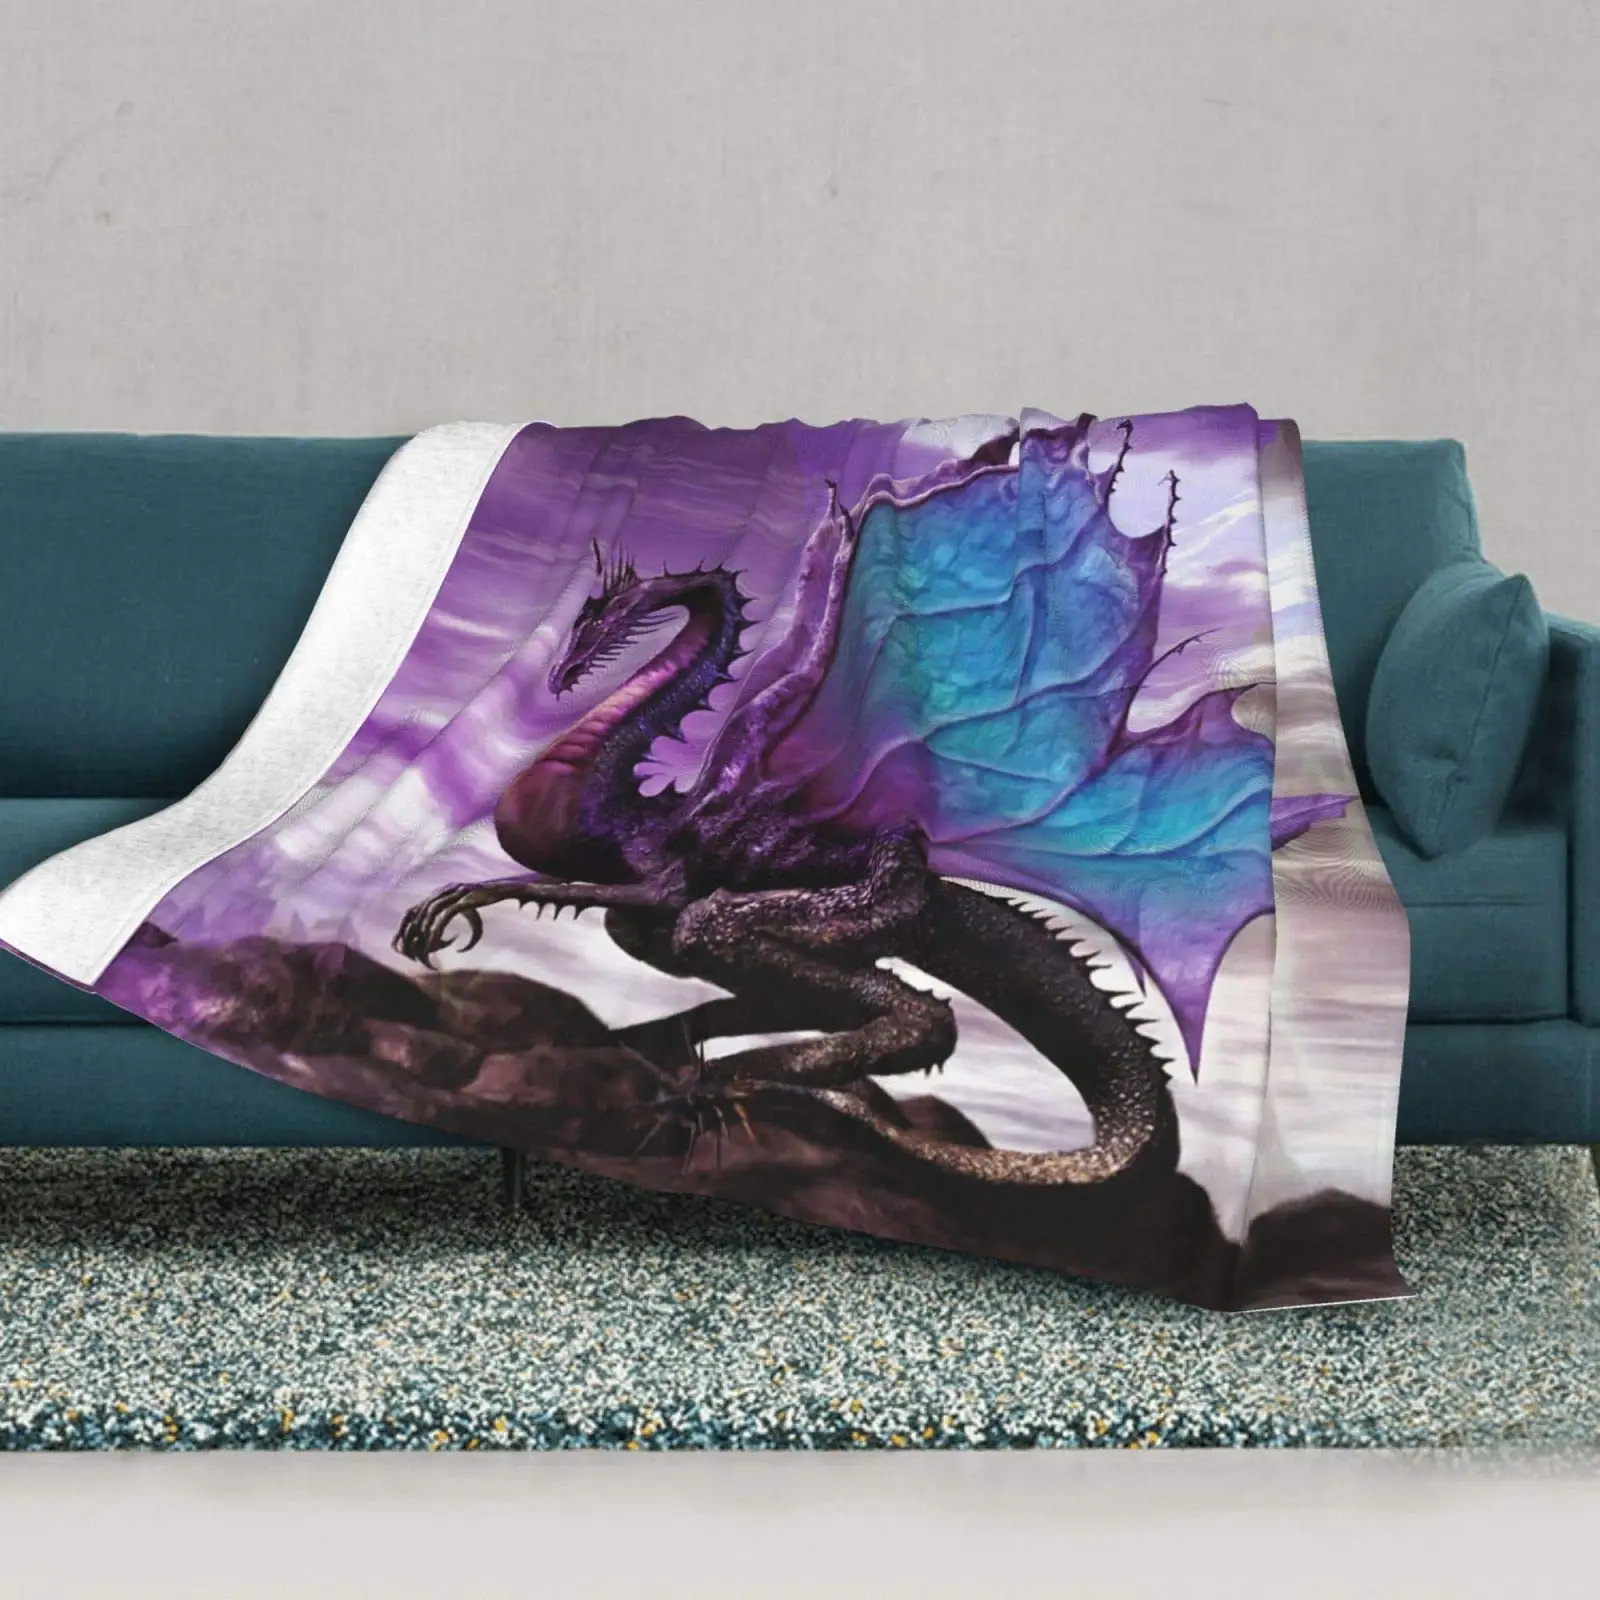 

Purple Dragon Throw Blanket Warm Ultra-Soft Micro Fleece Blanket for Bed Couch Living Room,Flame Dragon Fuzzy Plush Blanket Gift